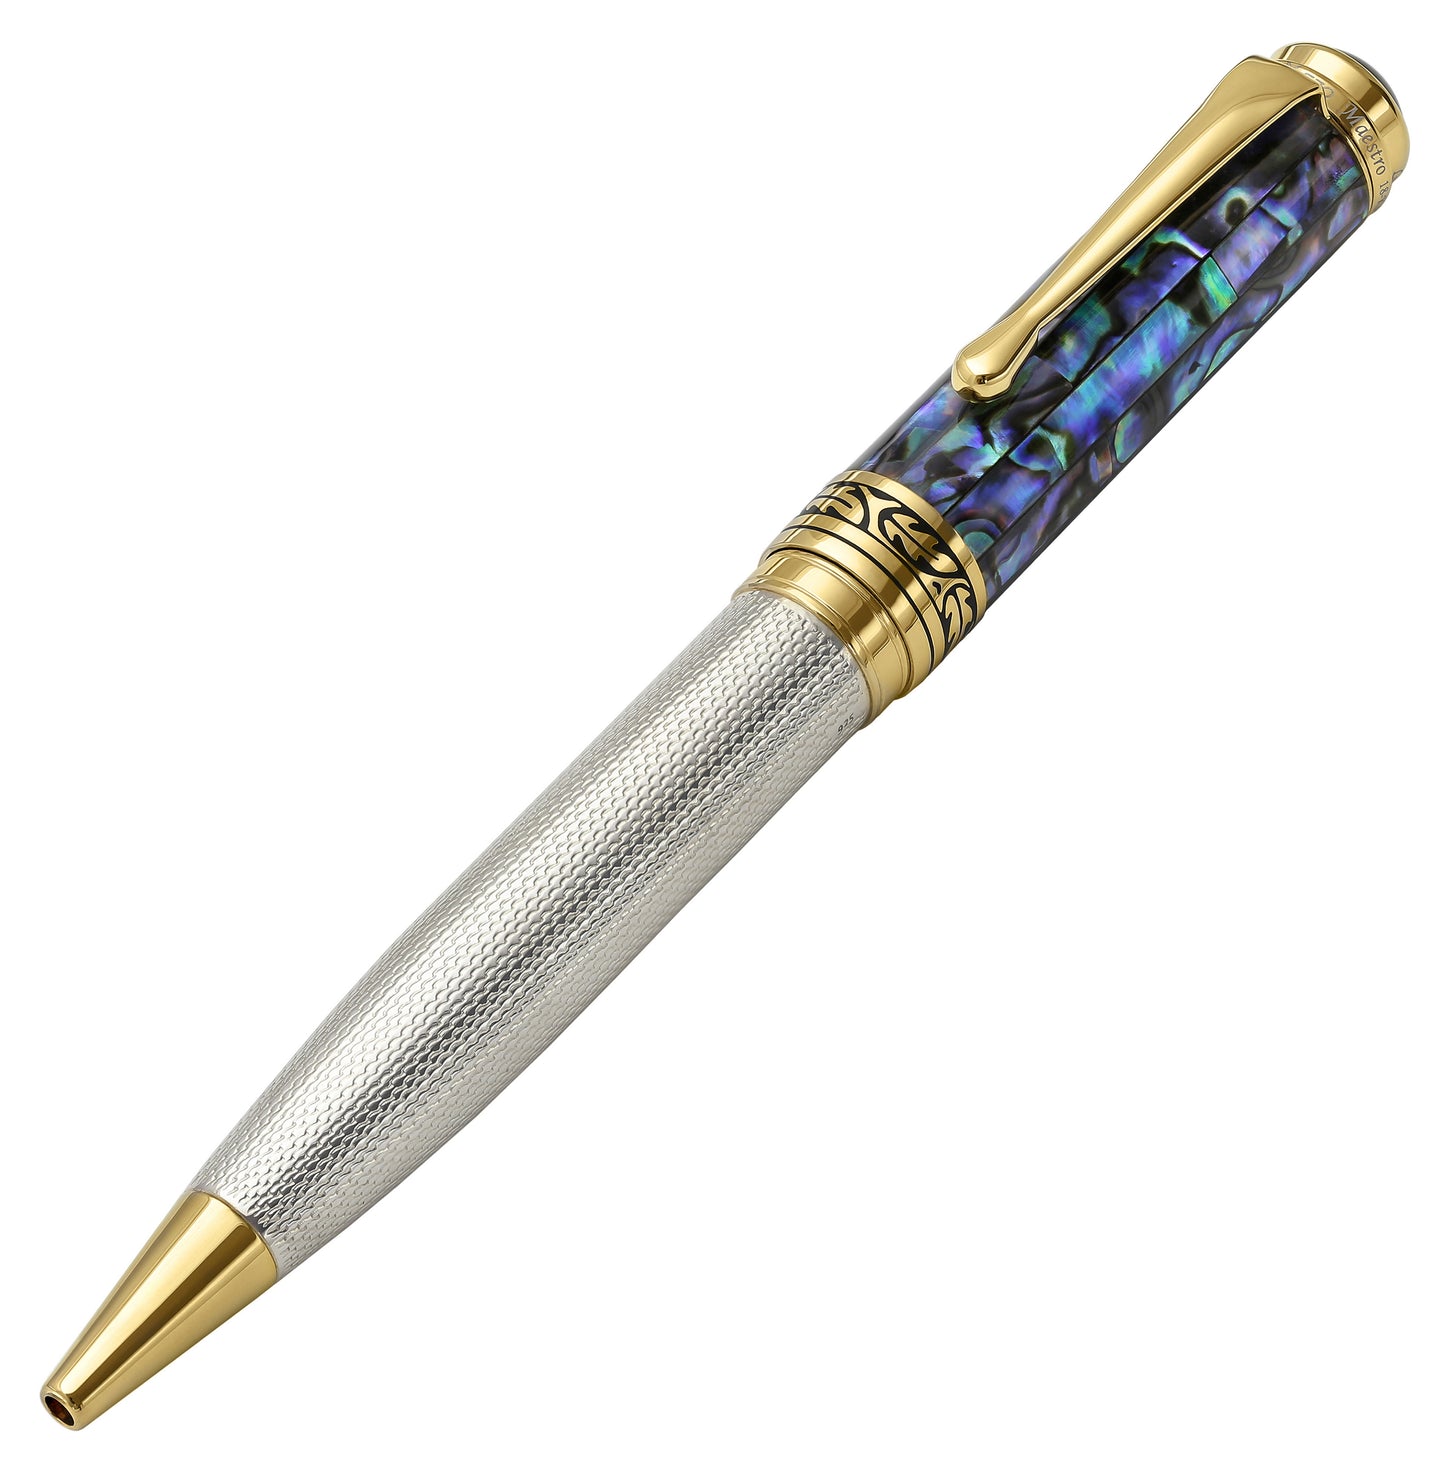 Xezo - Angled view of the front of the Maestro 925 Sea Shell B ballpoint pen